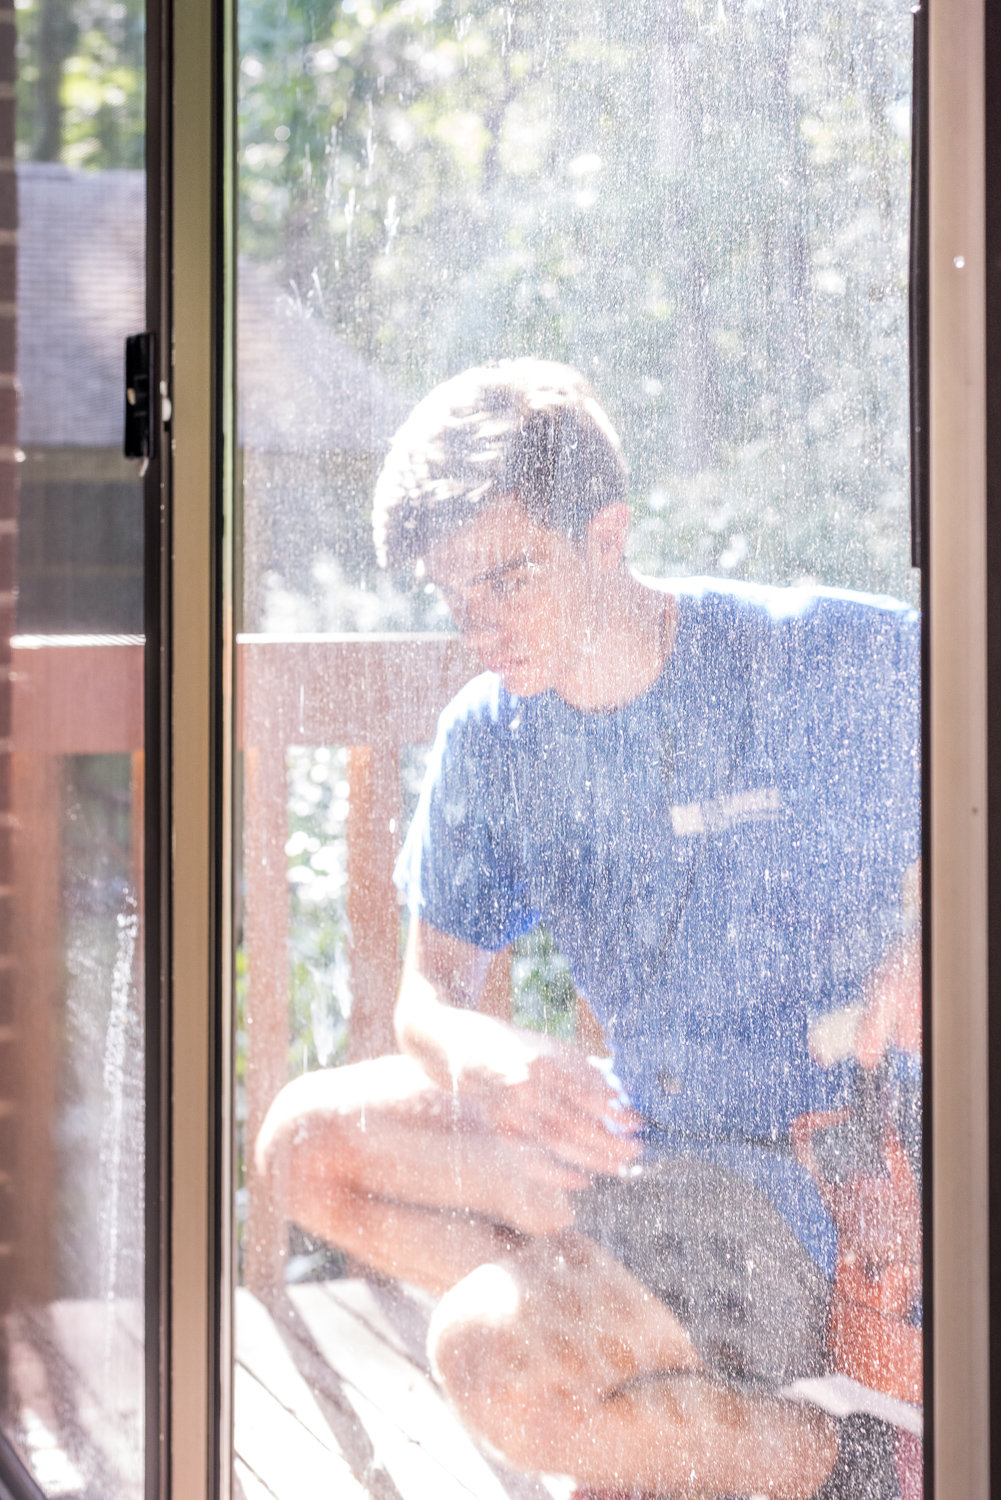 Before cleaning we inspect your window for best approach in Richmond, VA.